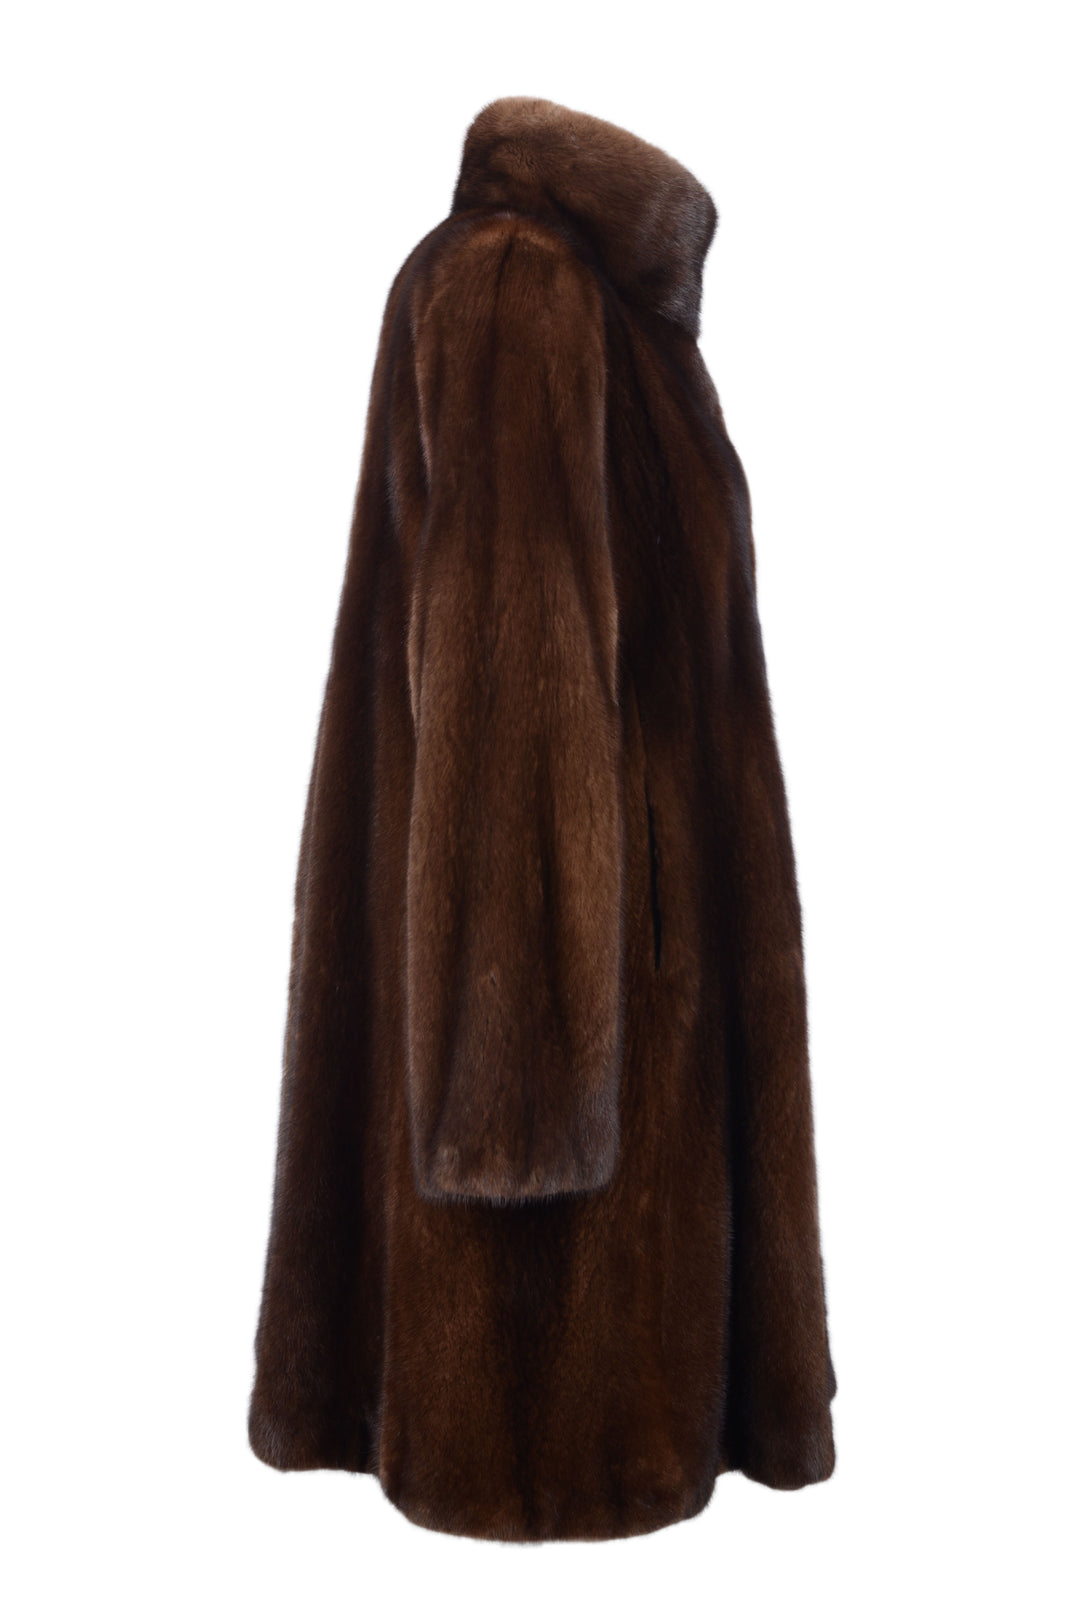 Chic mink coat with stand up collar